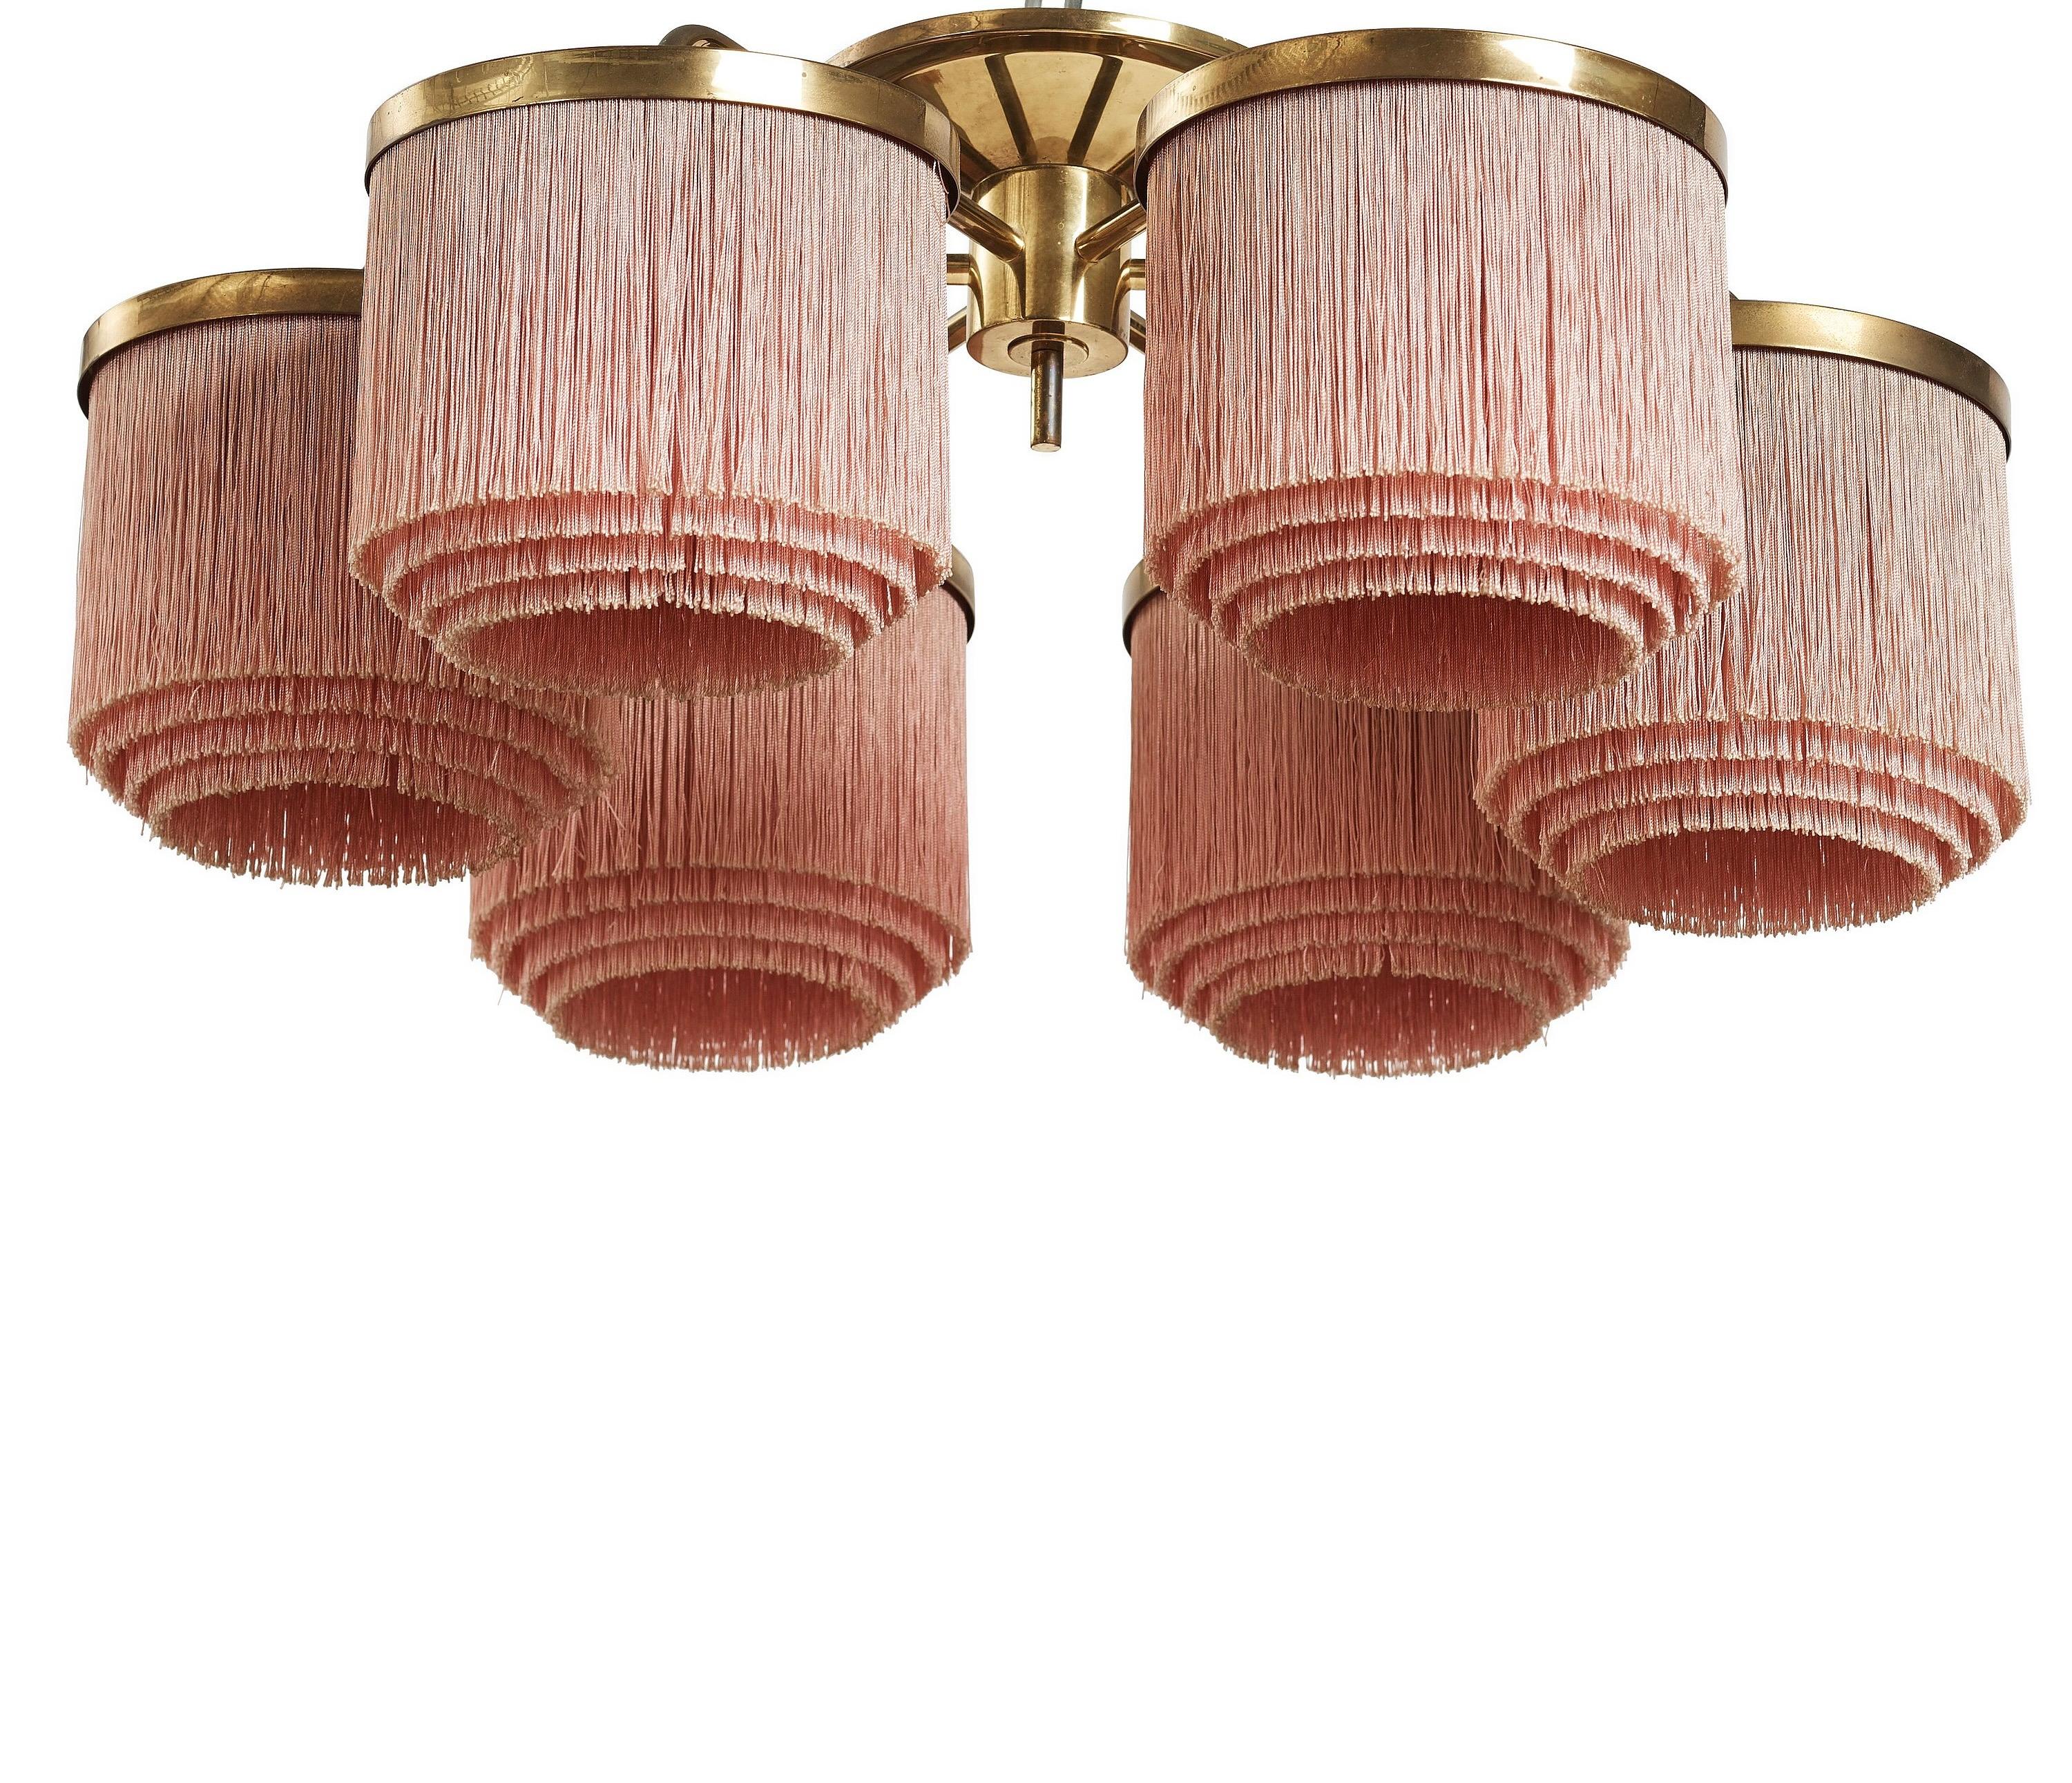 Hans-Agne Jakobsson, rare ceiling lamp. Brass and pink silk fringes, 6 shades. Manufactured by Hans-Agne Jakobsson AB in the 1960s in Markaryd, Sweden.